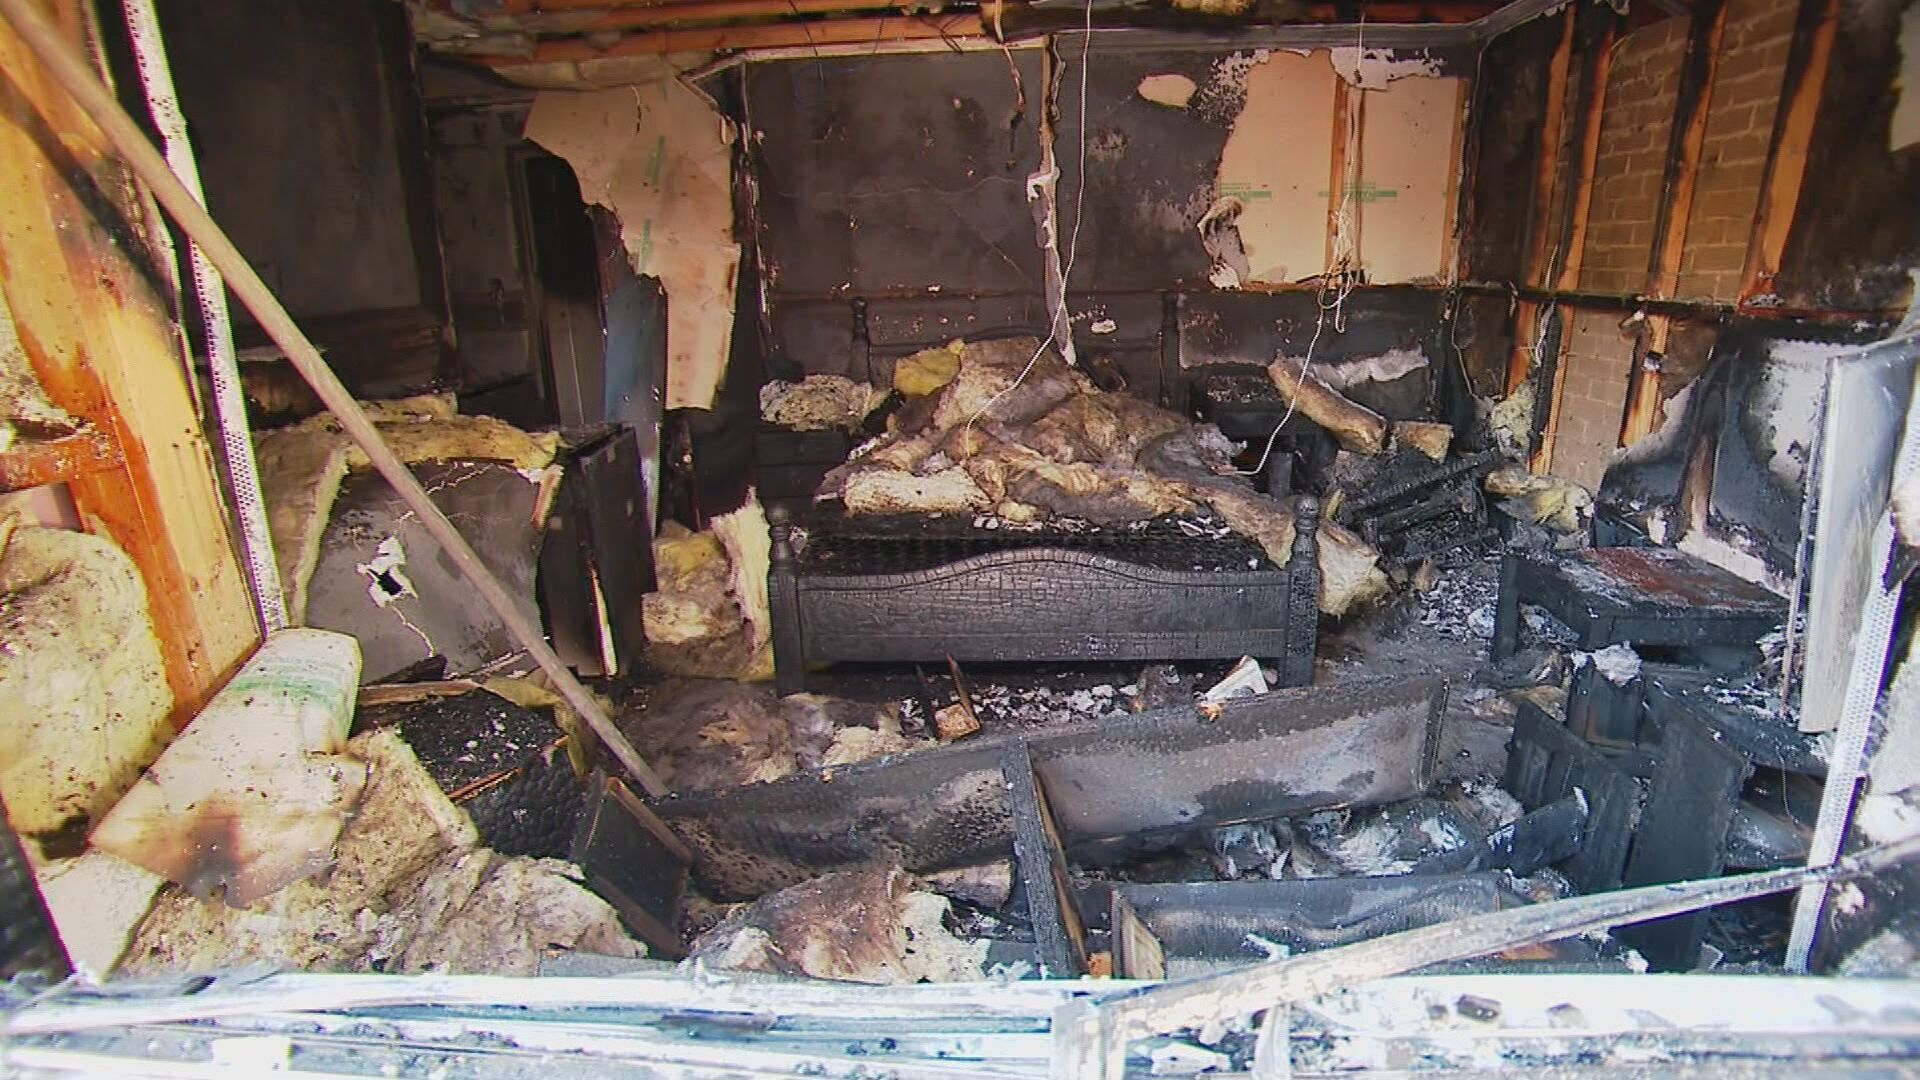 Faulty phone charger sparks devastating house fire